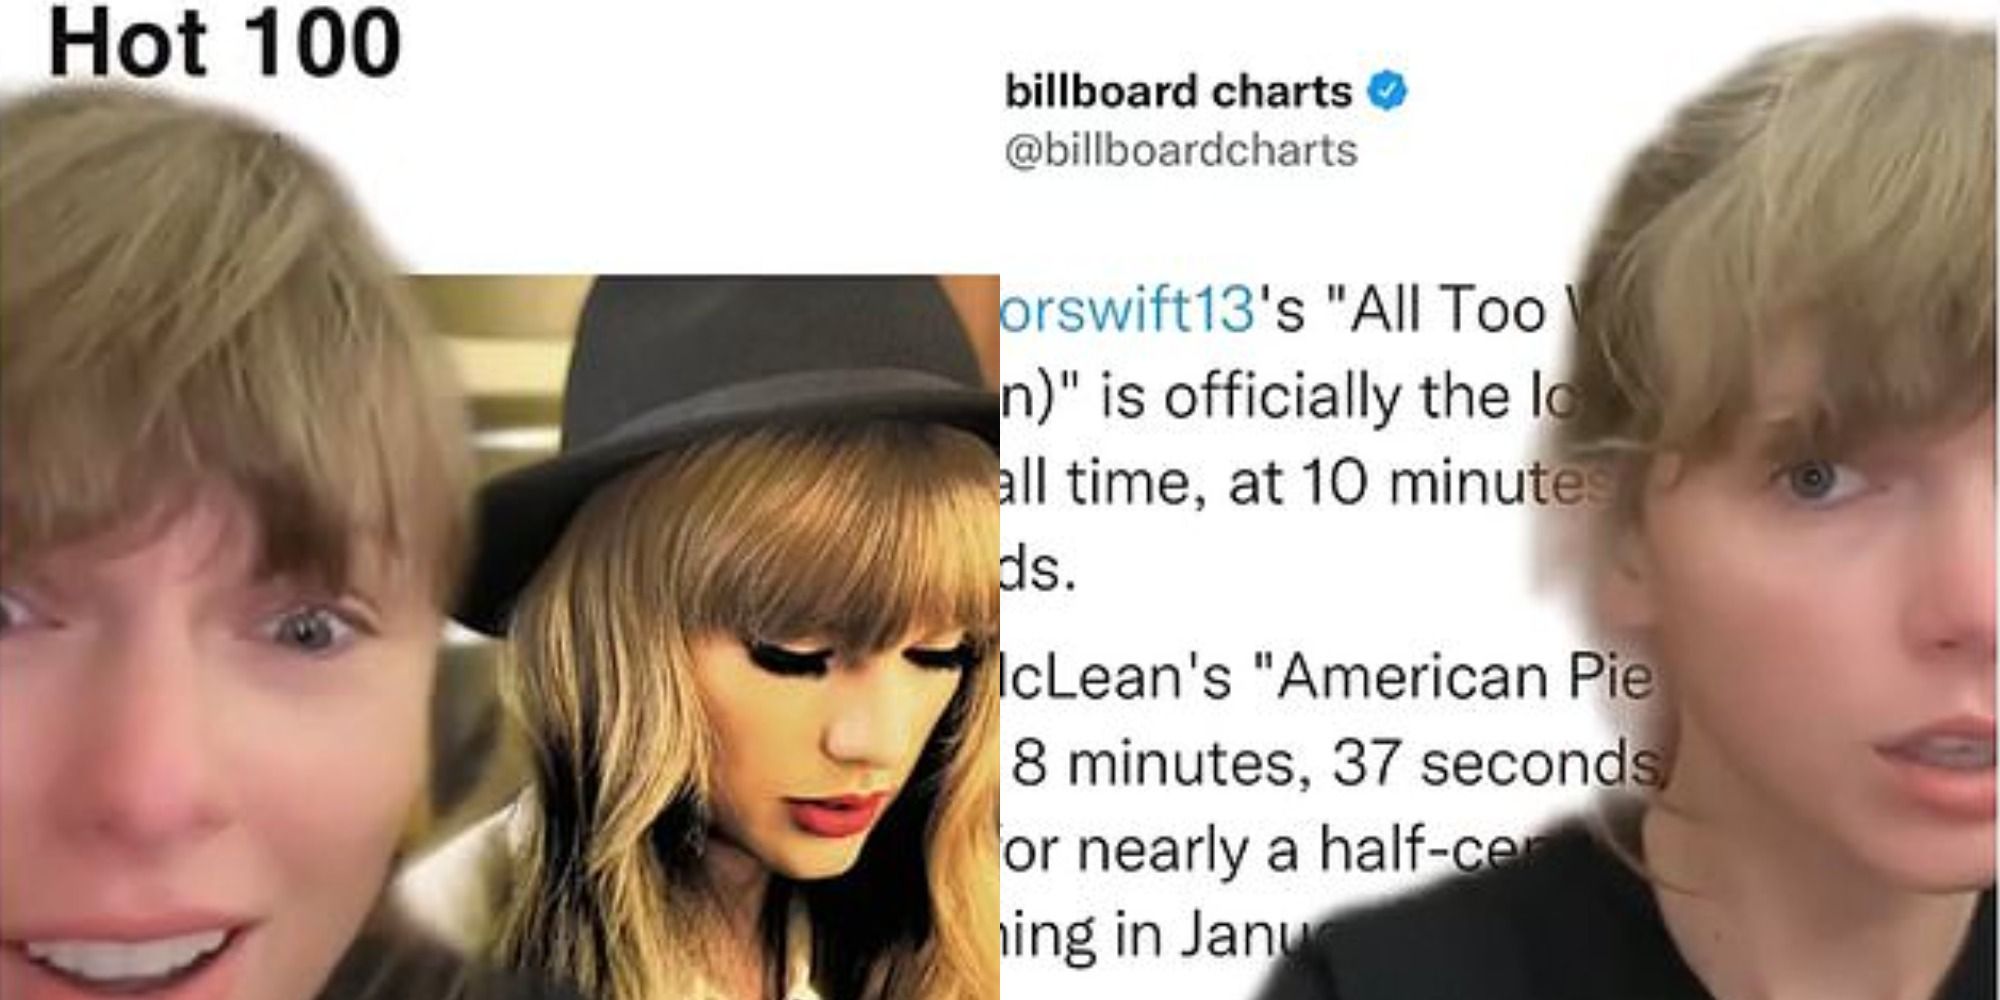 Split image of Taylor Swift's reel about All Too well breaking records.